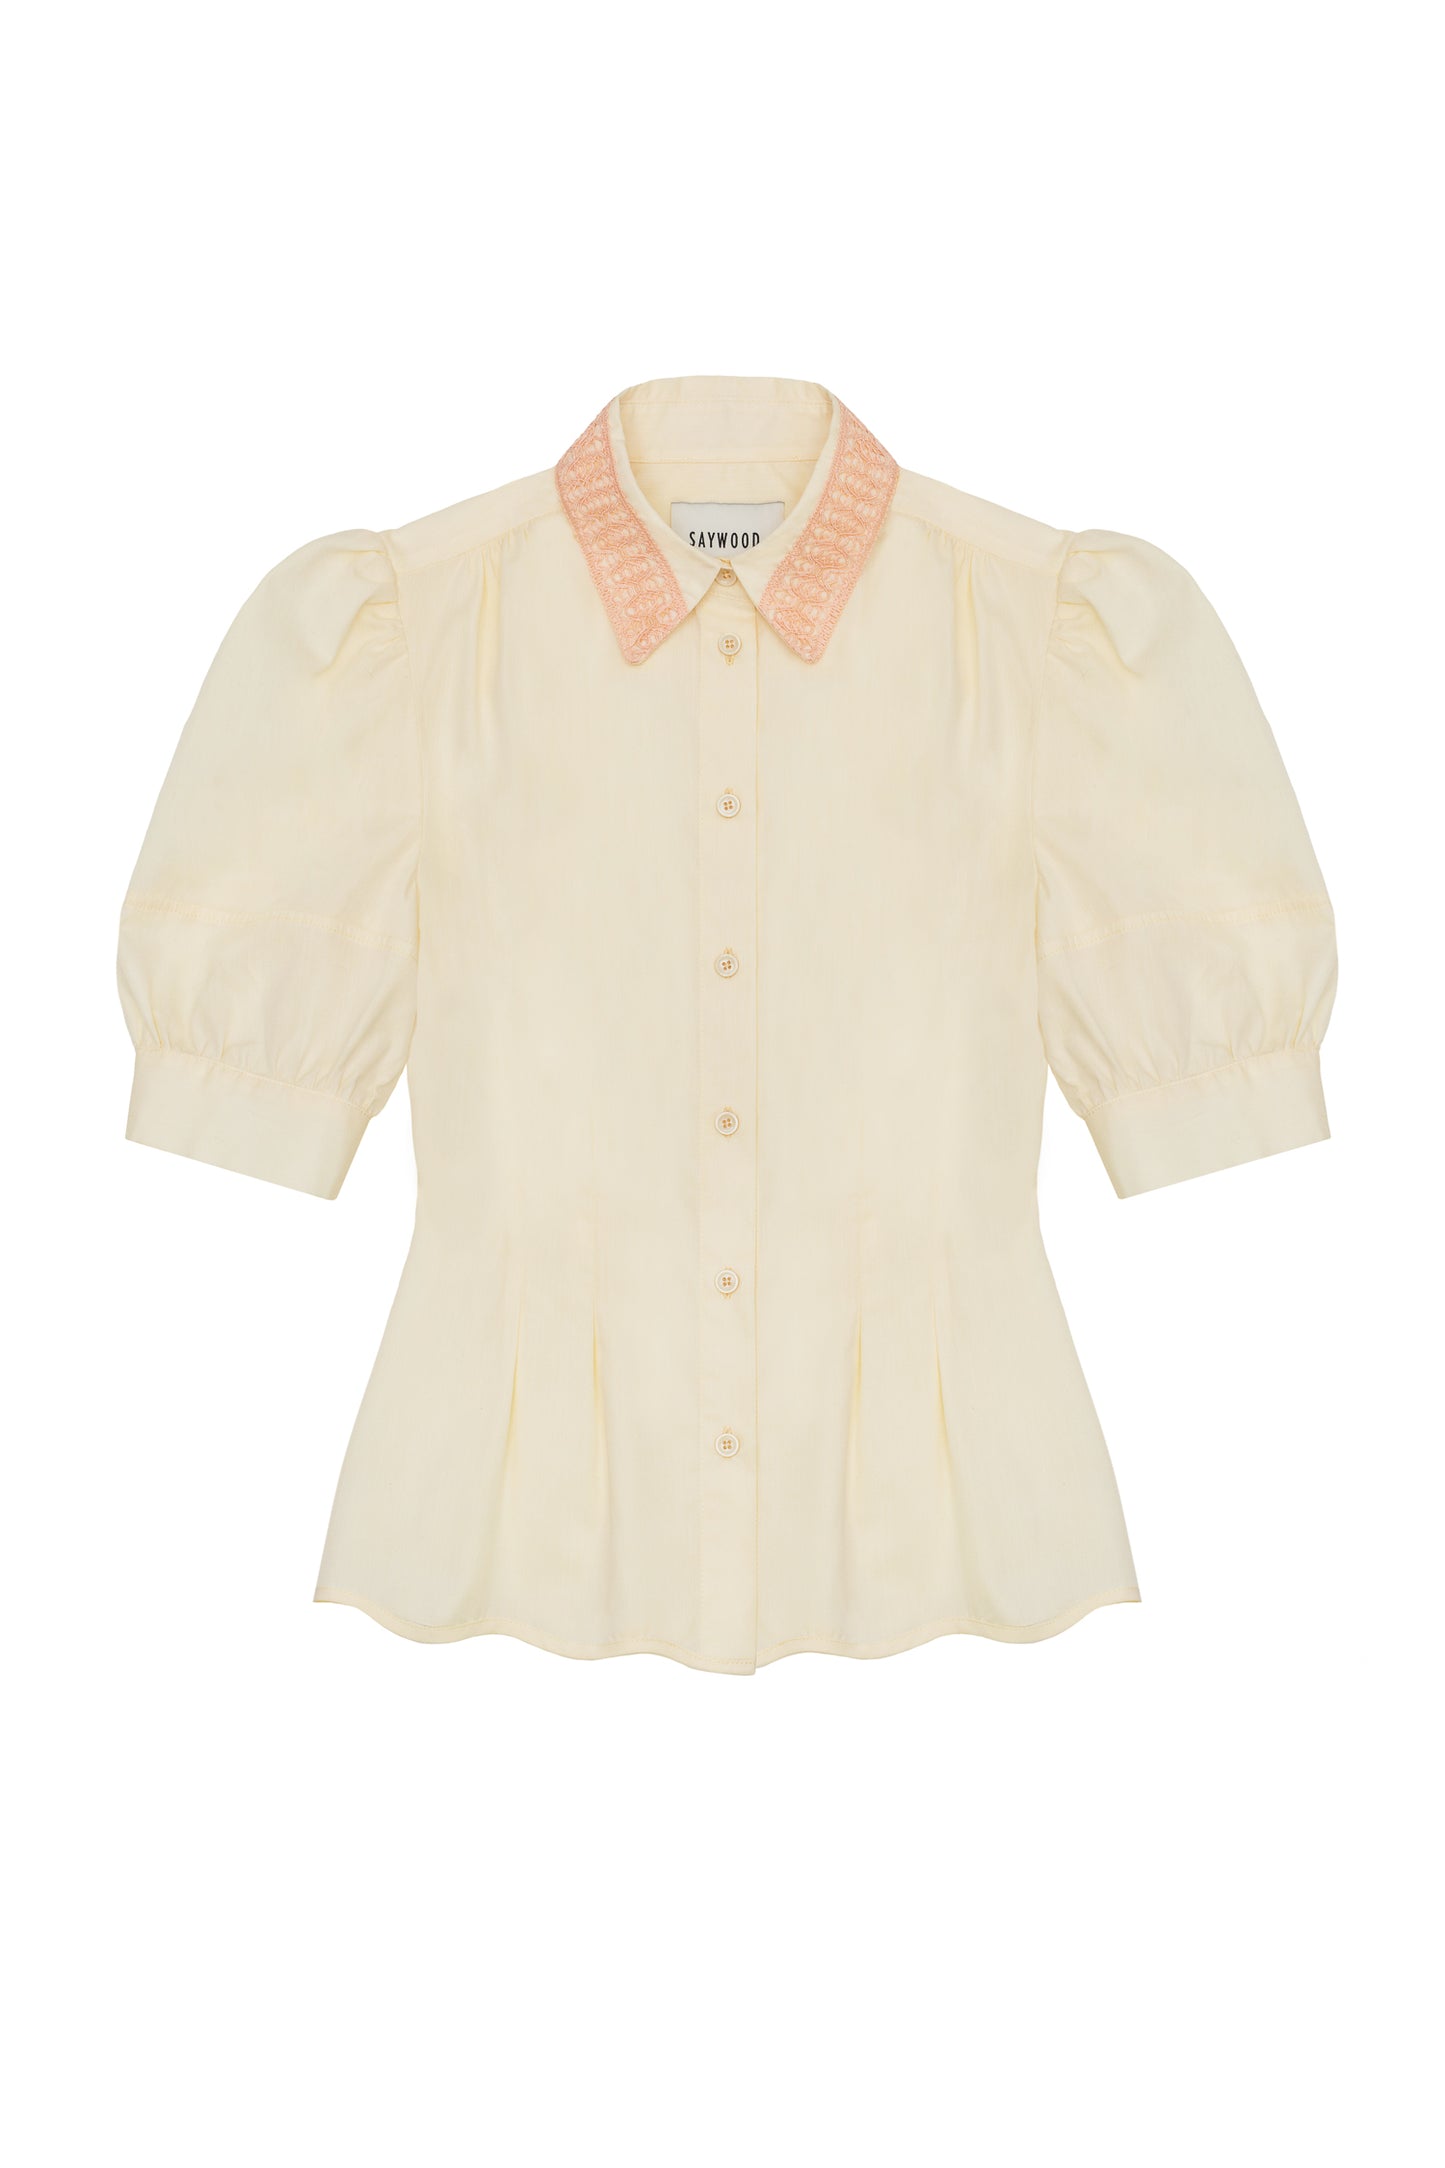 Womens pale yellow puff sleeve blouse with soft orange lace trim collar. Scalloped hem and soft darts at waist.